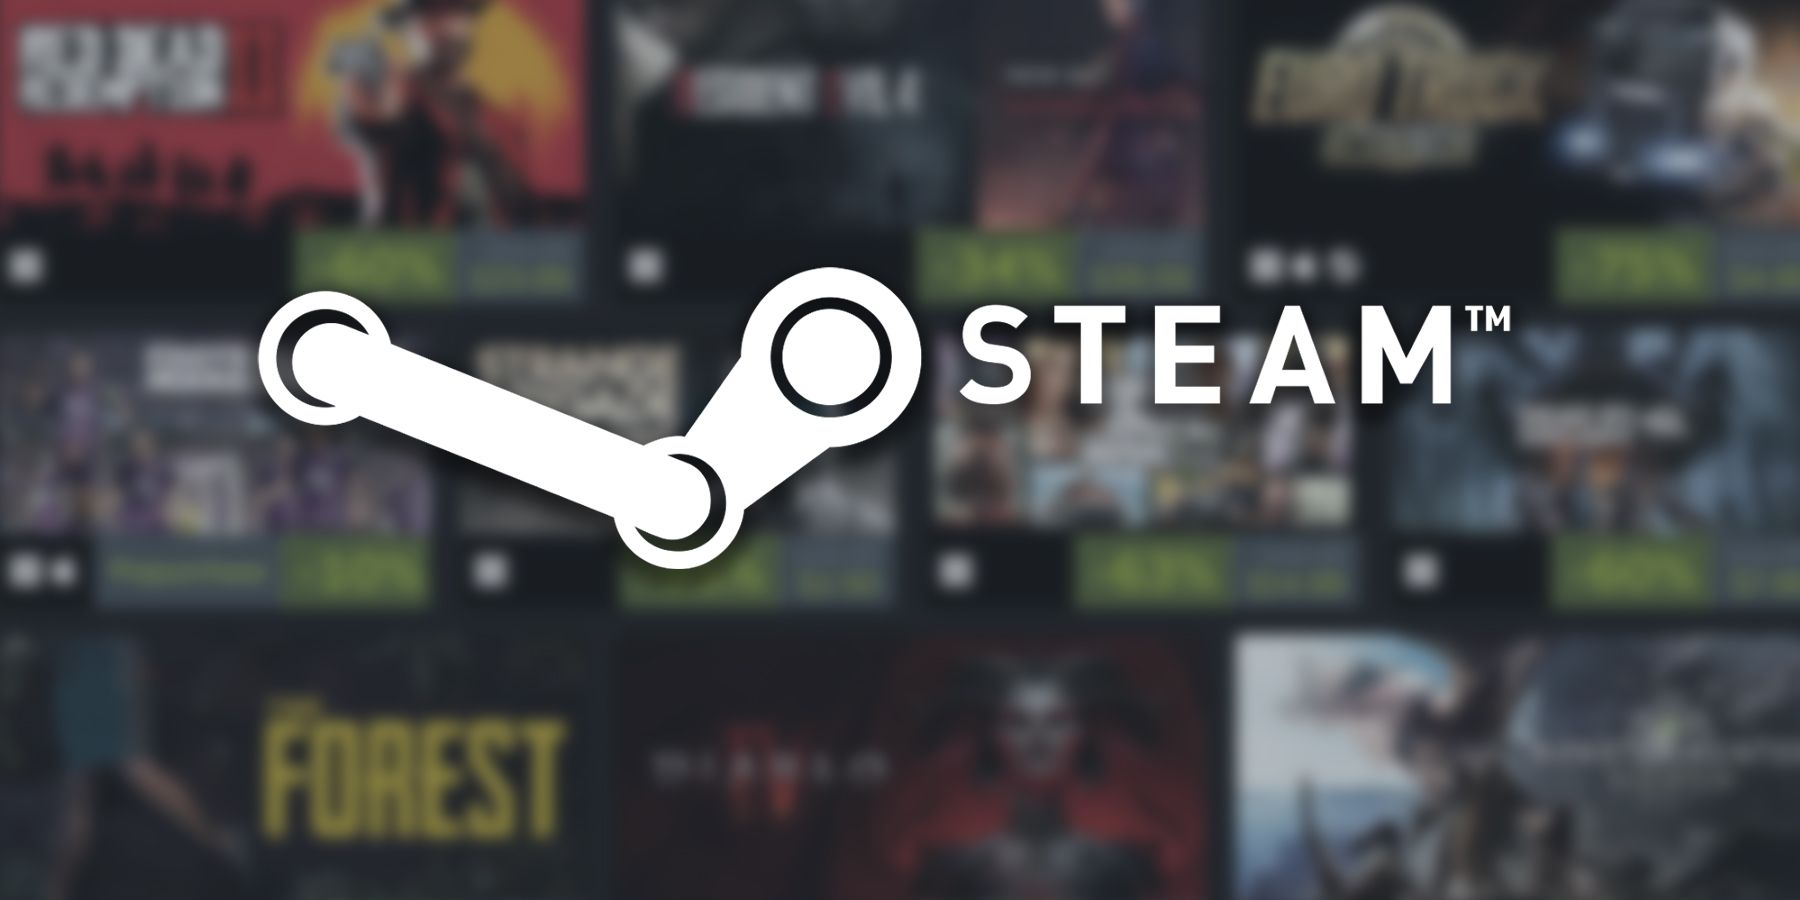 Today is the end of Steam': Argentina and Turkey floored by new Steam price  hikes as high as 2900%